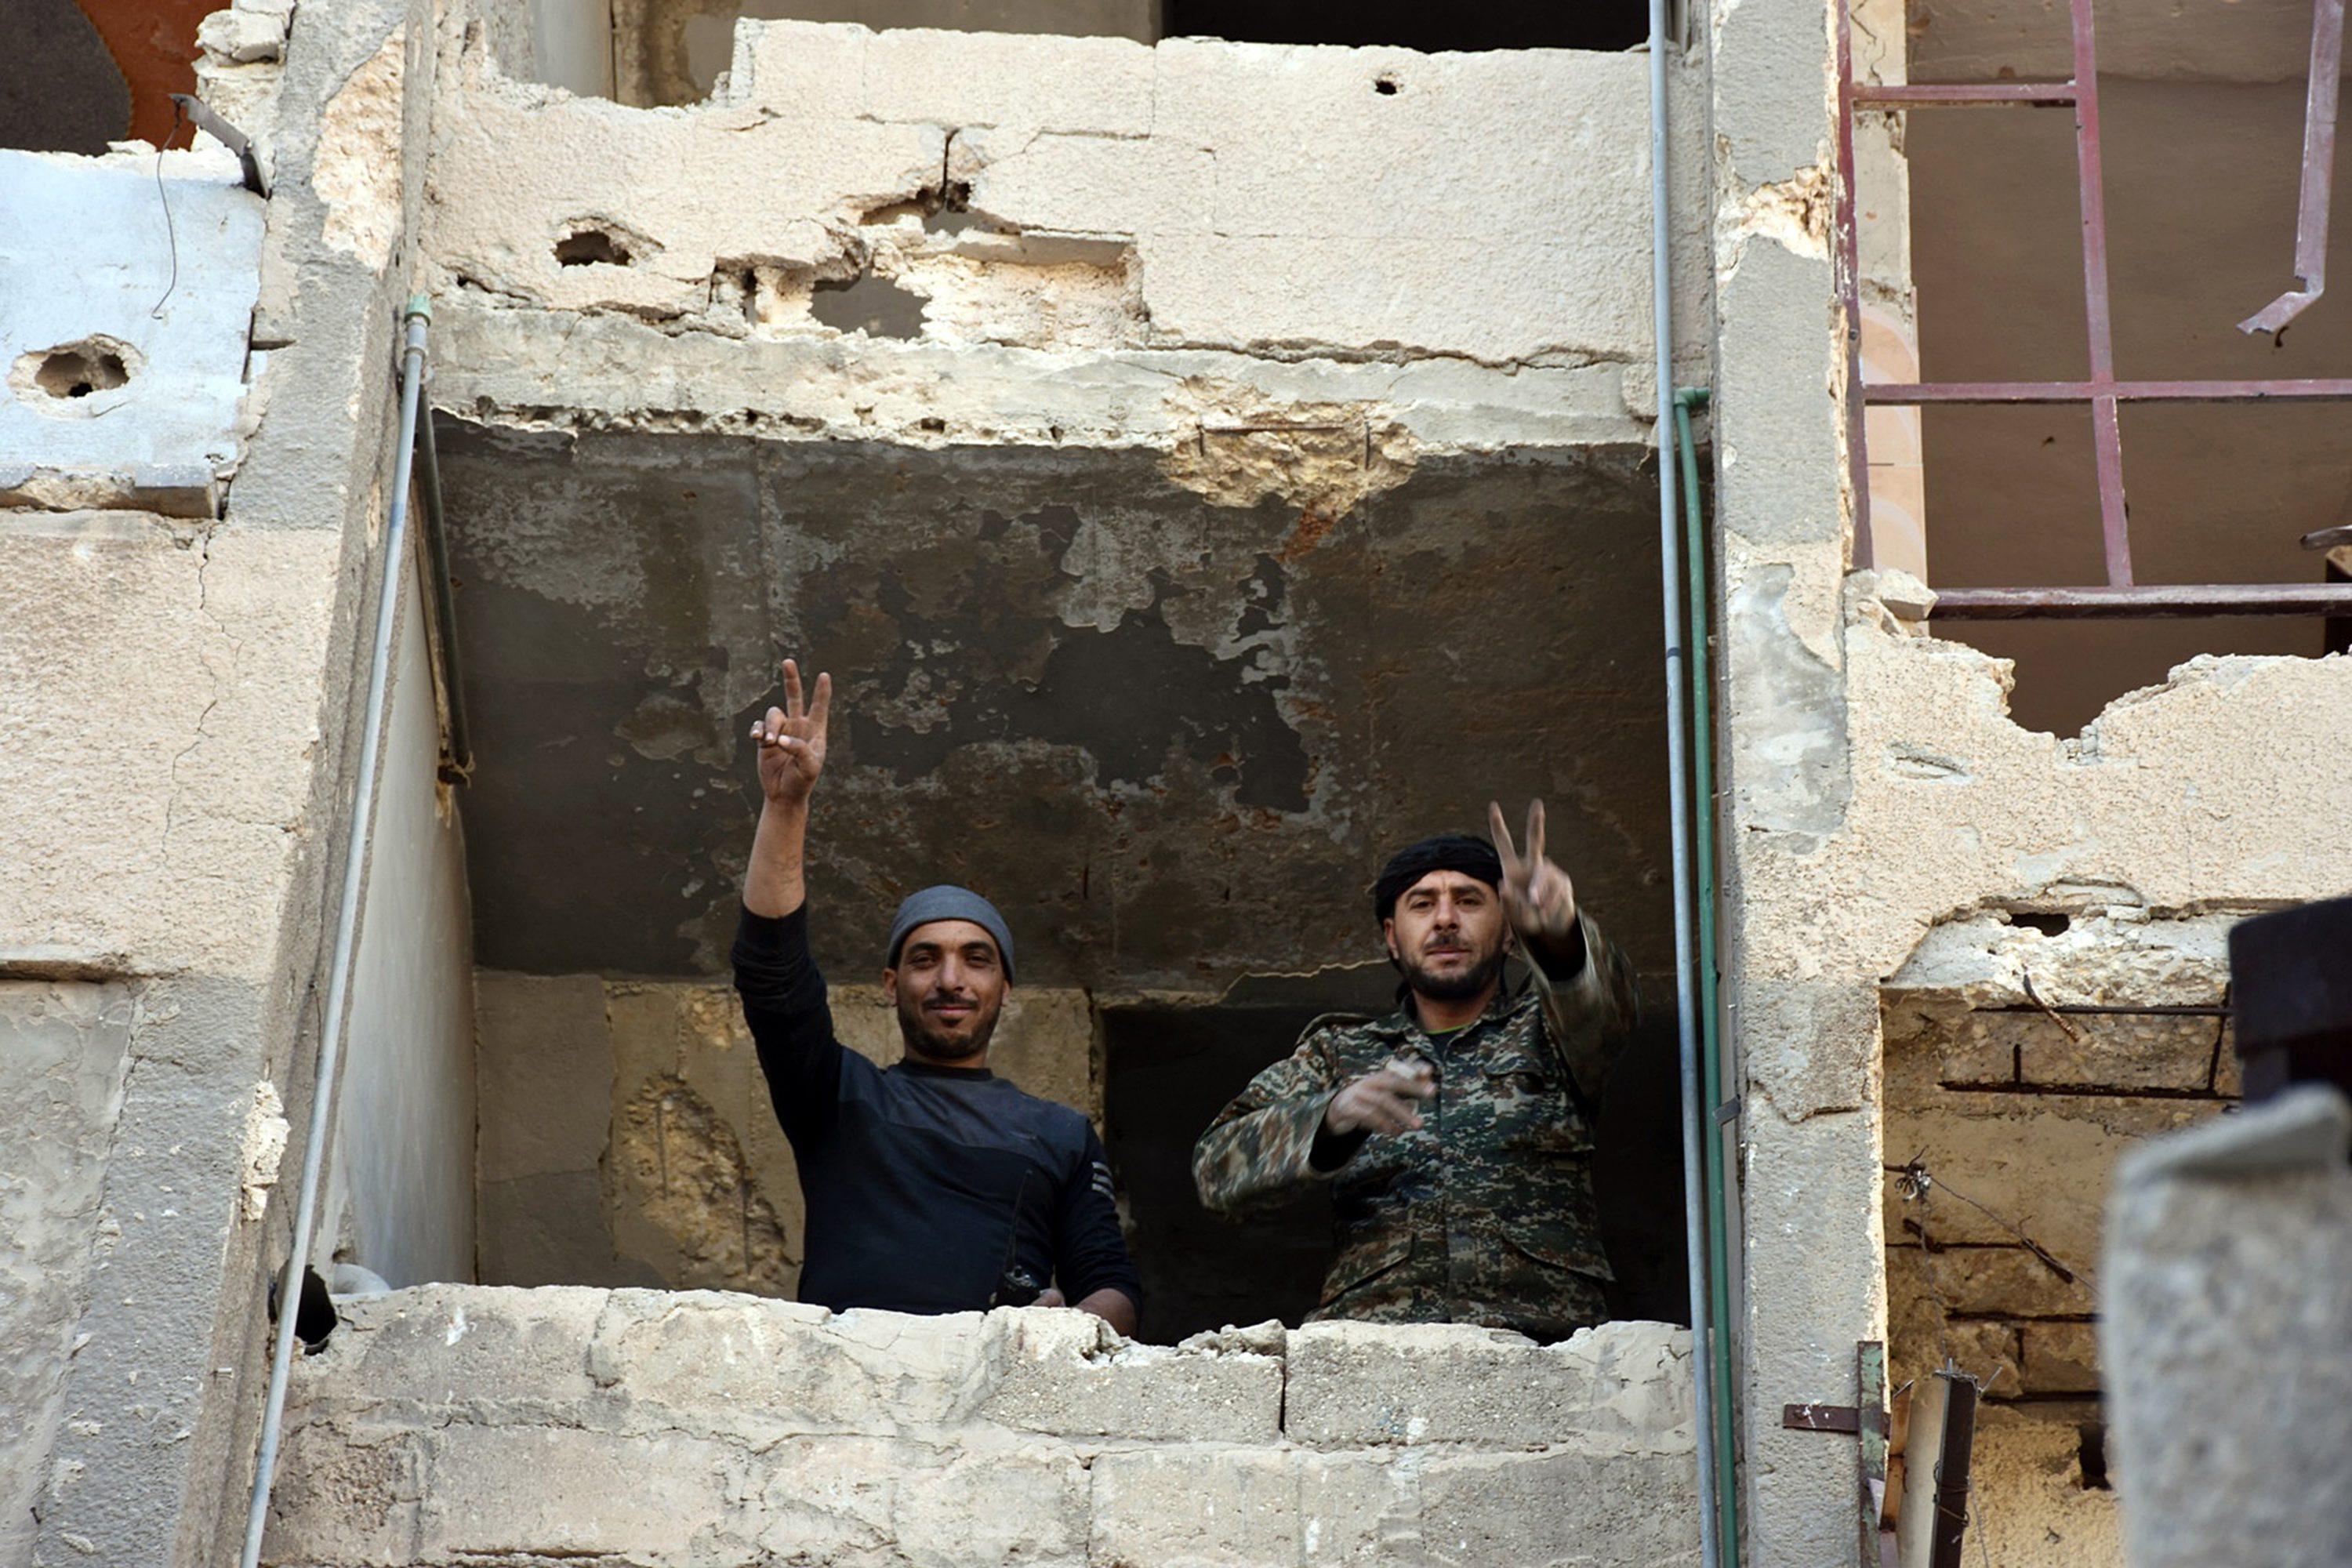 epa05650141 A handout picture made available by the official Syrian Arab News Agency (SANA) shows Syrian soldiers making a V for victory sign from a window of damaged building in Aleppo's eastern Masaken Hanano area in Aleppo province, Syria, 27 November 2016. According to SANA a military source announced on 27 November 2016 that the army units in cooperation with the supporting forces established full control over Jabal Badro neighborhood and Masaken Hanano area in Aleppo . EPA/SANA HANDOUT HANDOUT EDITORIAL USE ONLY/NO SALES